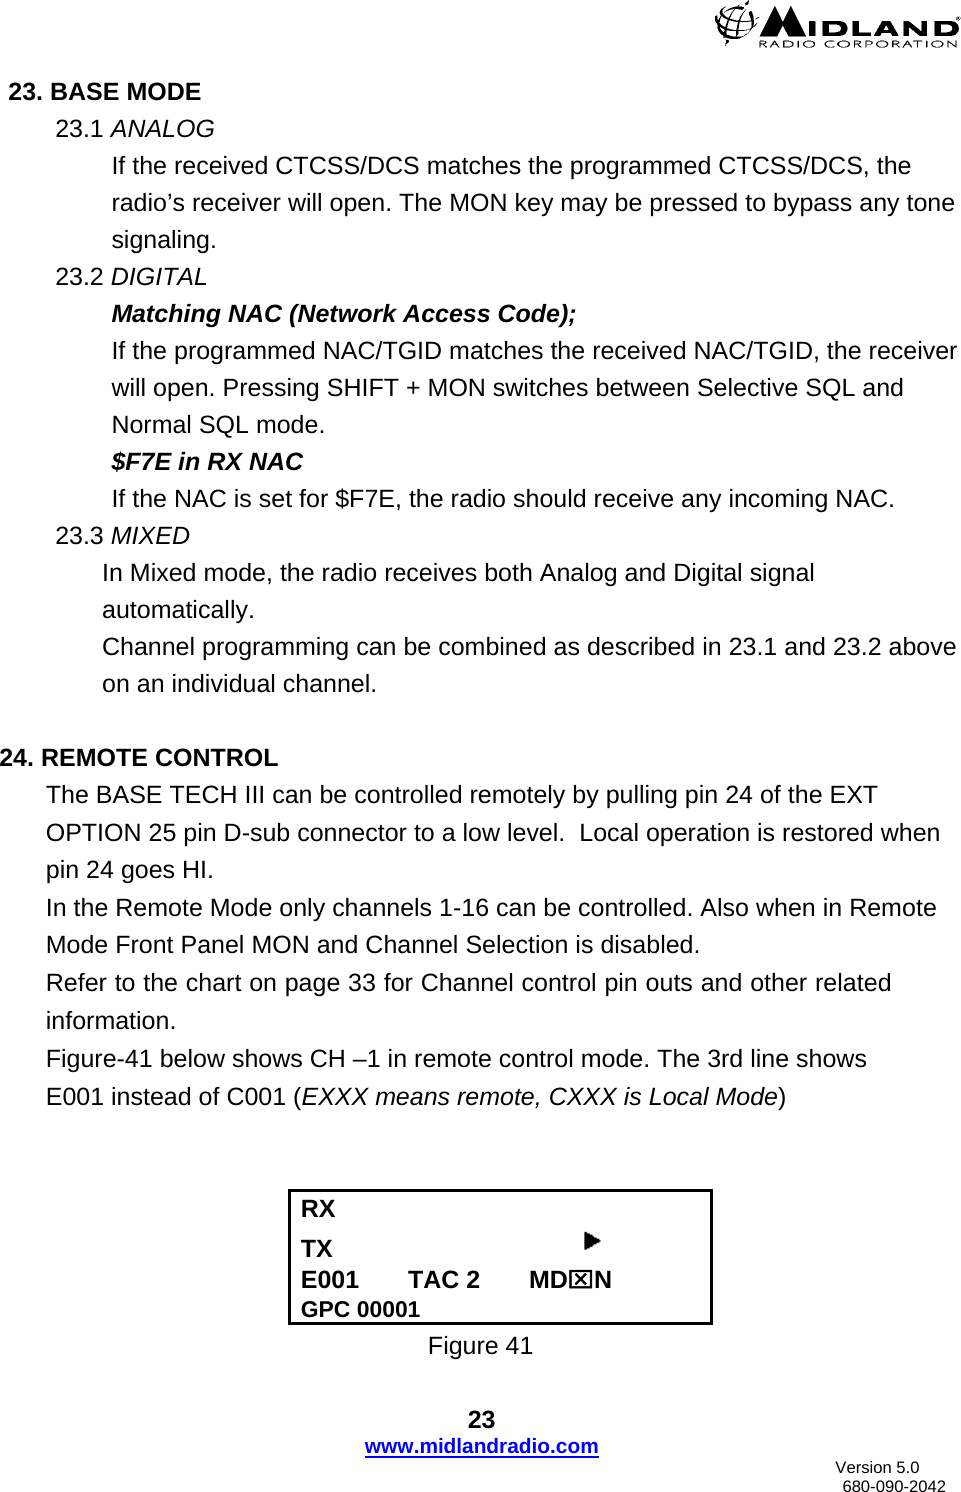  23. BASE MODE 23.1 ANALOG If the received CTCSS/DCS matches the programmed CTCSS/DCS, the radio’s receiver will open. The MON key may be pressed to bypass any tone signaling. 23.2 DIGITAL Matching NAC (Network Access Code); If the programmed NAC/TGID matches the received NAC/TGID, the receiver will open. Pressing SHIFT + MON switches between Selective SQL and Normal SQL mode. $F7E in RX NAC If the NAC is set for $F7E, the radio should receive any incoming NAC. 23.3 MIXED In Mixed mode, the radio receives both Analog and Digital signal       automatically. Channel programming can be combined as described in 23.1 and 23.2 above on an individual channel.  24. REMOTE CONTROL The BASE TECH III can be controlled remotely by pulling pin 24 of the EXT OPTION 25 pin D-sub connector to a low level.  Local operation is restored when pin 24 goes HI. In the Remote Mode only channels 1-16 can be controlled. Also when in Remote   Mode Front Panel MON and Channel Selection is disabled.  Refer to the chart on page 33 for Channel control pin outs and other related information. Figure-41 below shows CH –1 in remote control mode. The 3rd line shows E001 instead of C001 (EXXX means remote, CXXX is Local Mode)   RX  TX                                     E001       TAC 2       MD⌧N GPC 00001 Figure 41 23 www.midlandradio.com                               Version 5.0     680-090-2042 